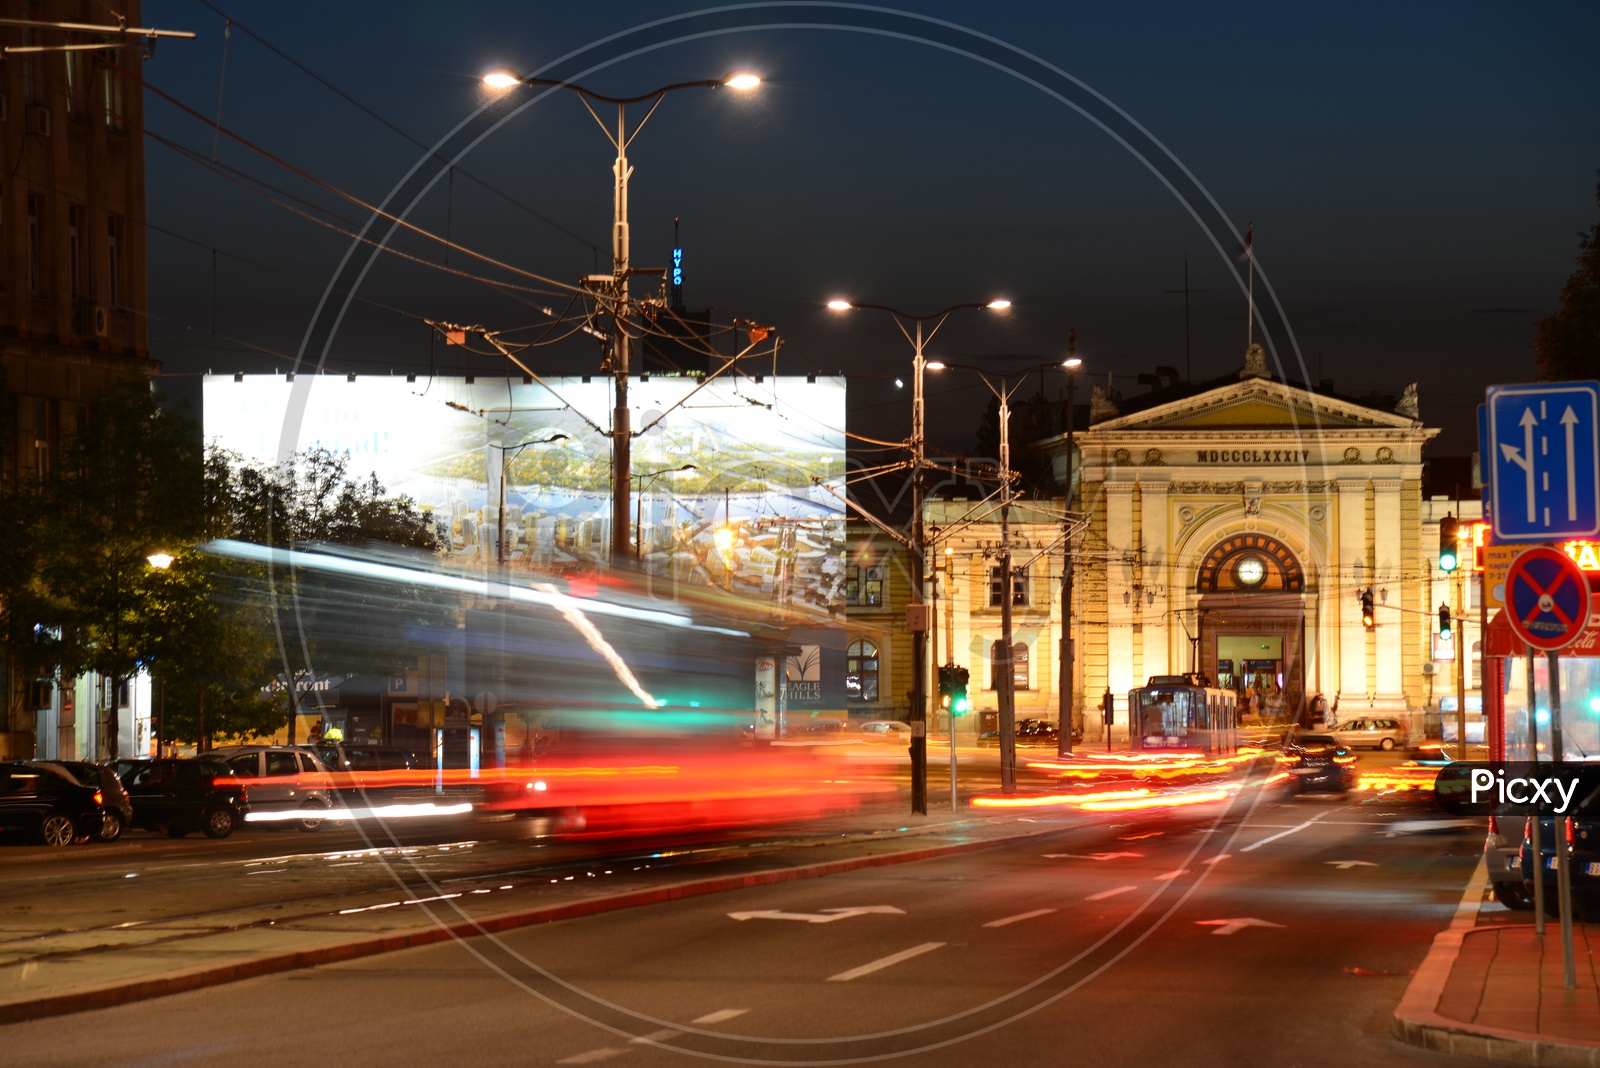 Long exposure Of Streets In Belgrade With Cars And Vehicles Running On Roads